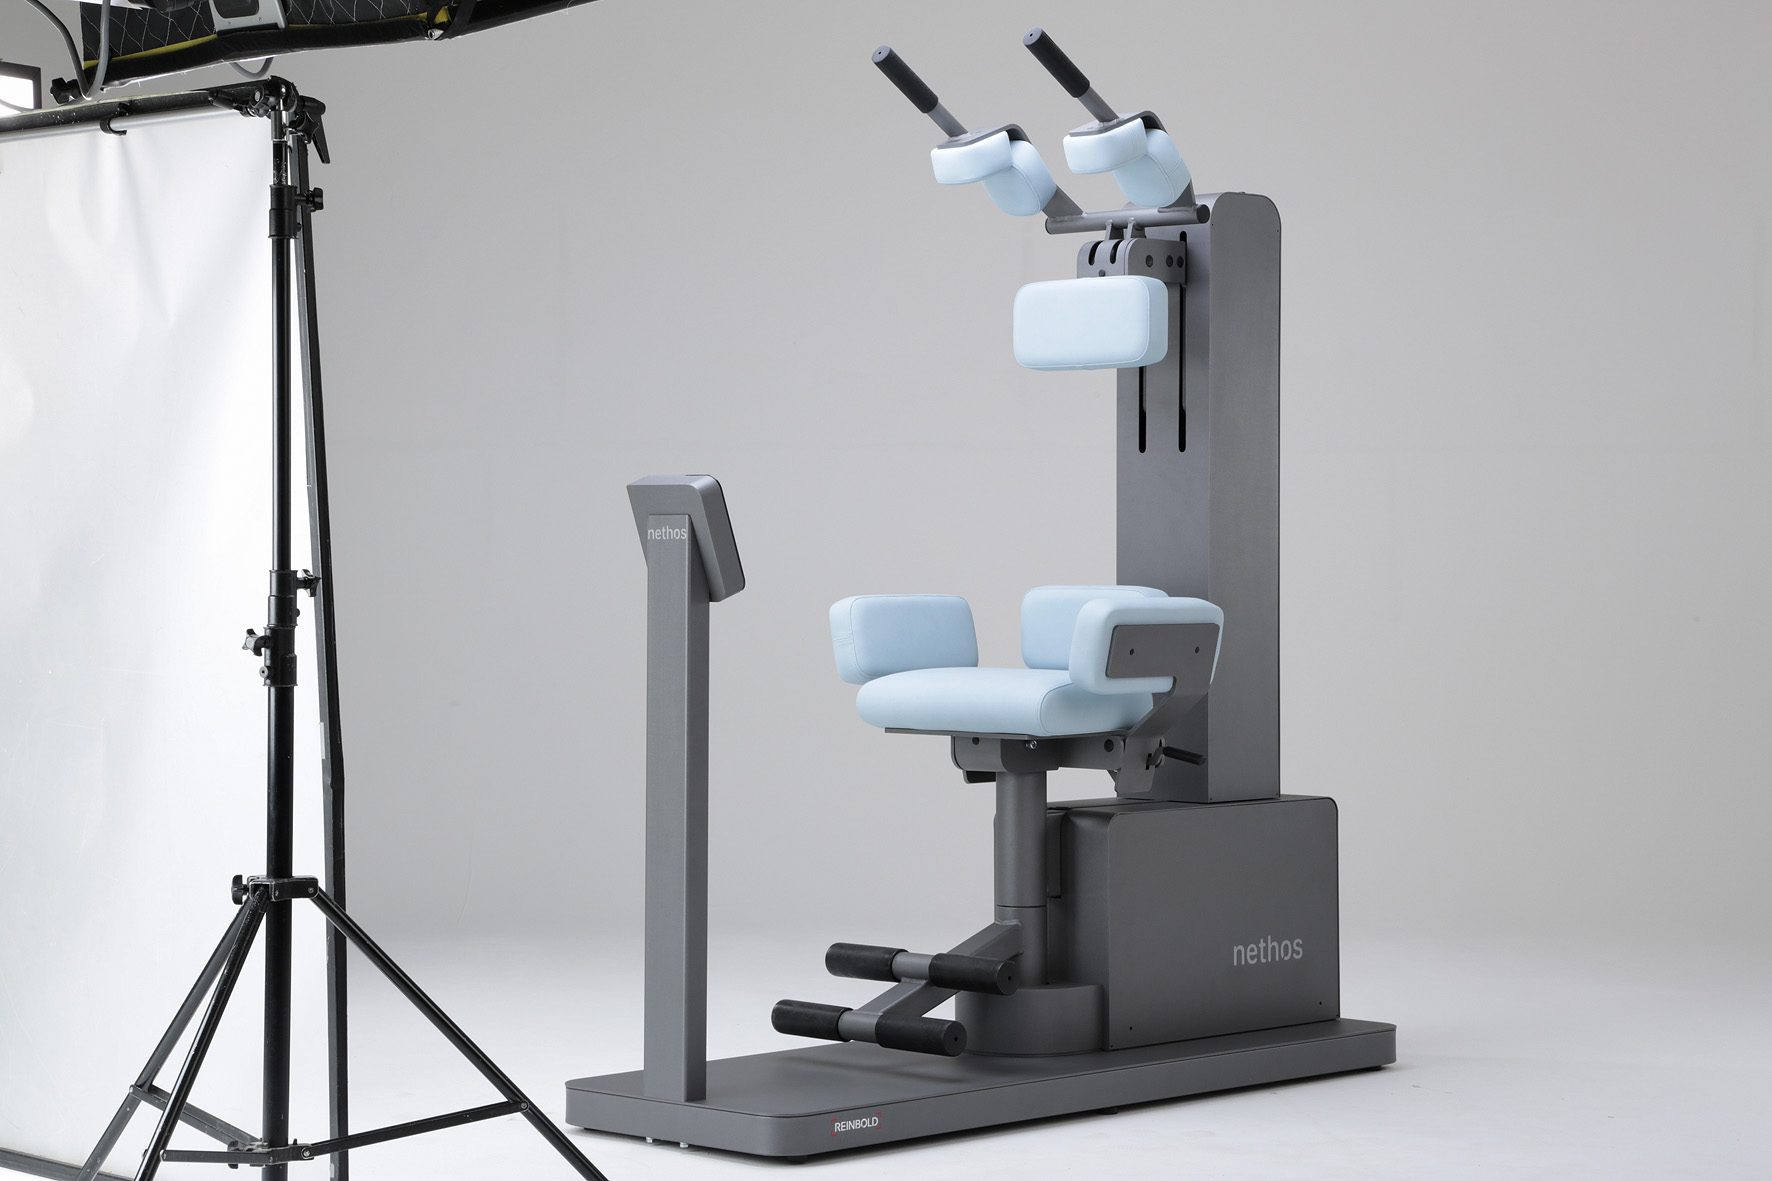 Photo production of the nethos® device series